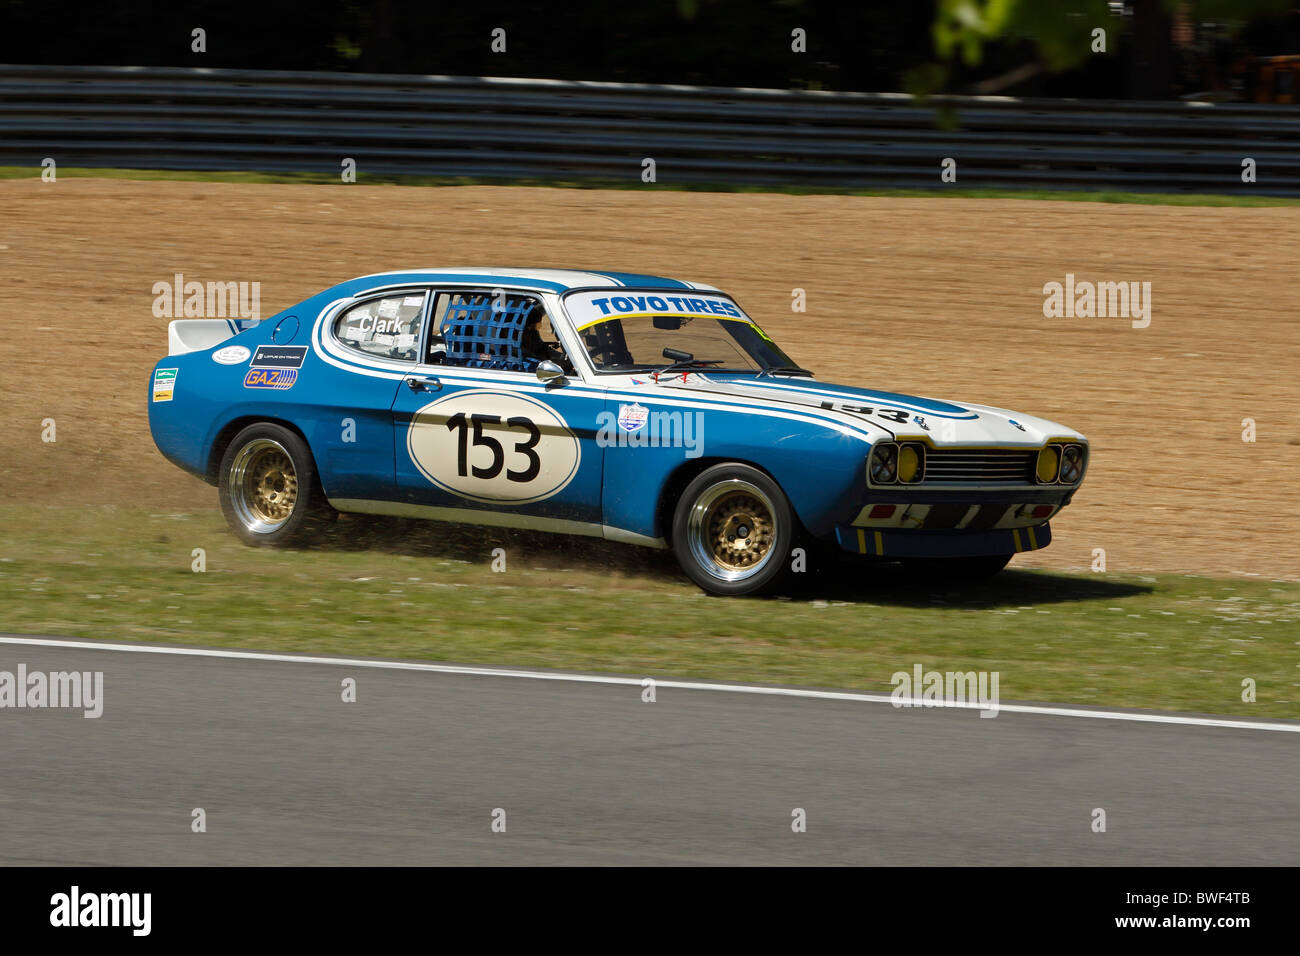 Ian Clark driving a Ford Capri GXL wide at Brands Hatch MSVR Weekend 2010 Stock Photo